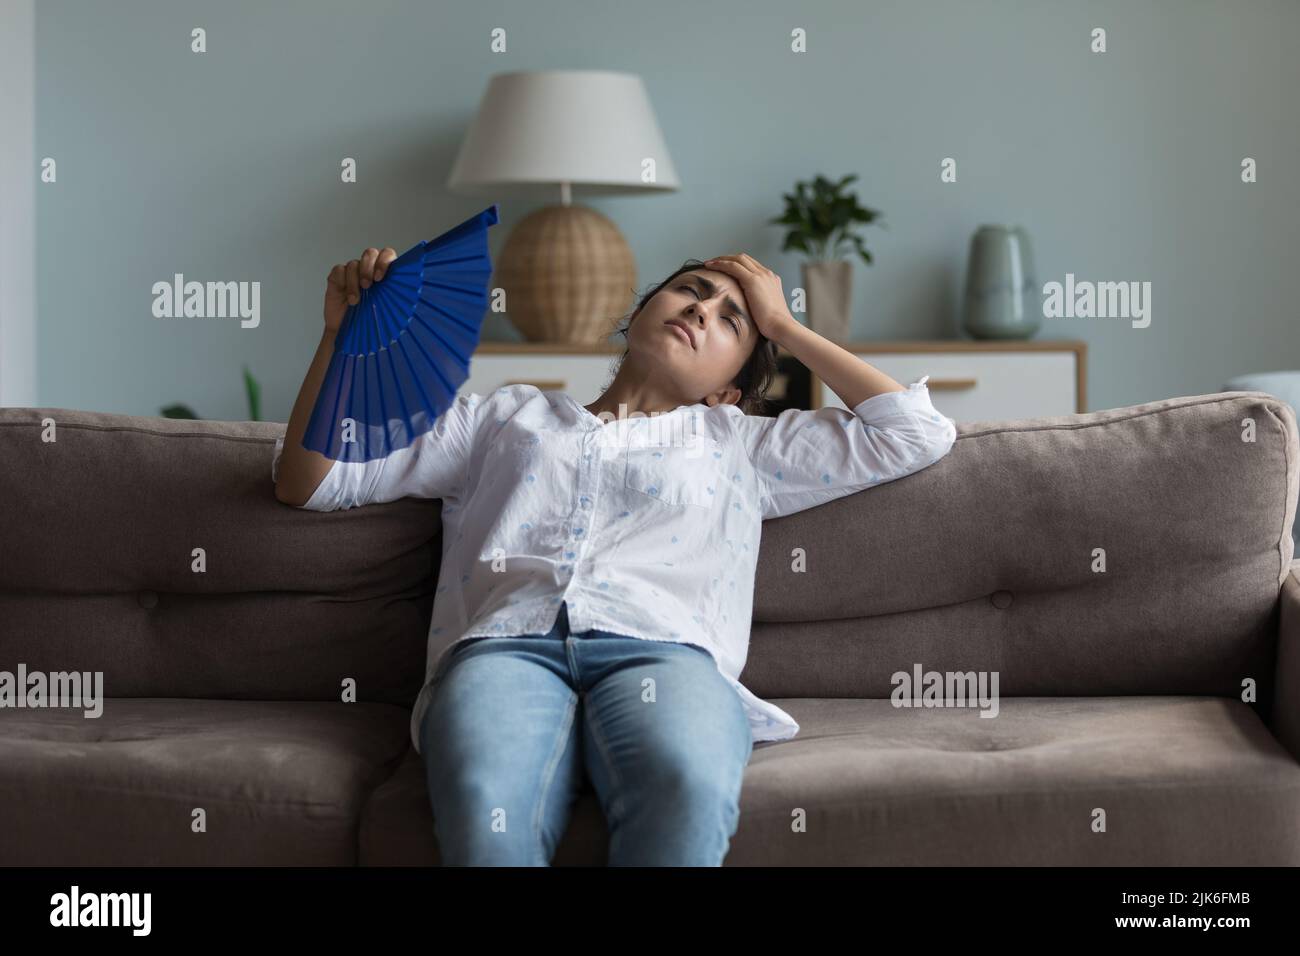 Exhausted young Indian girl feeling hot, resting on couch Stock Photo